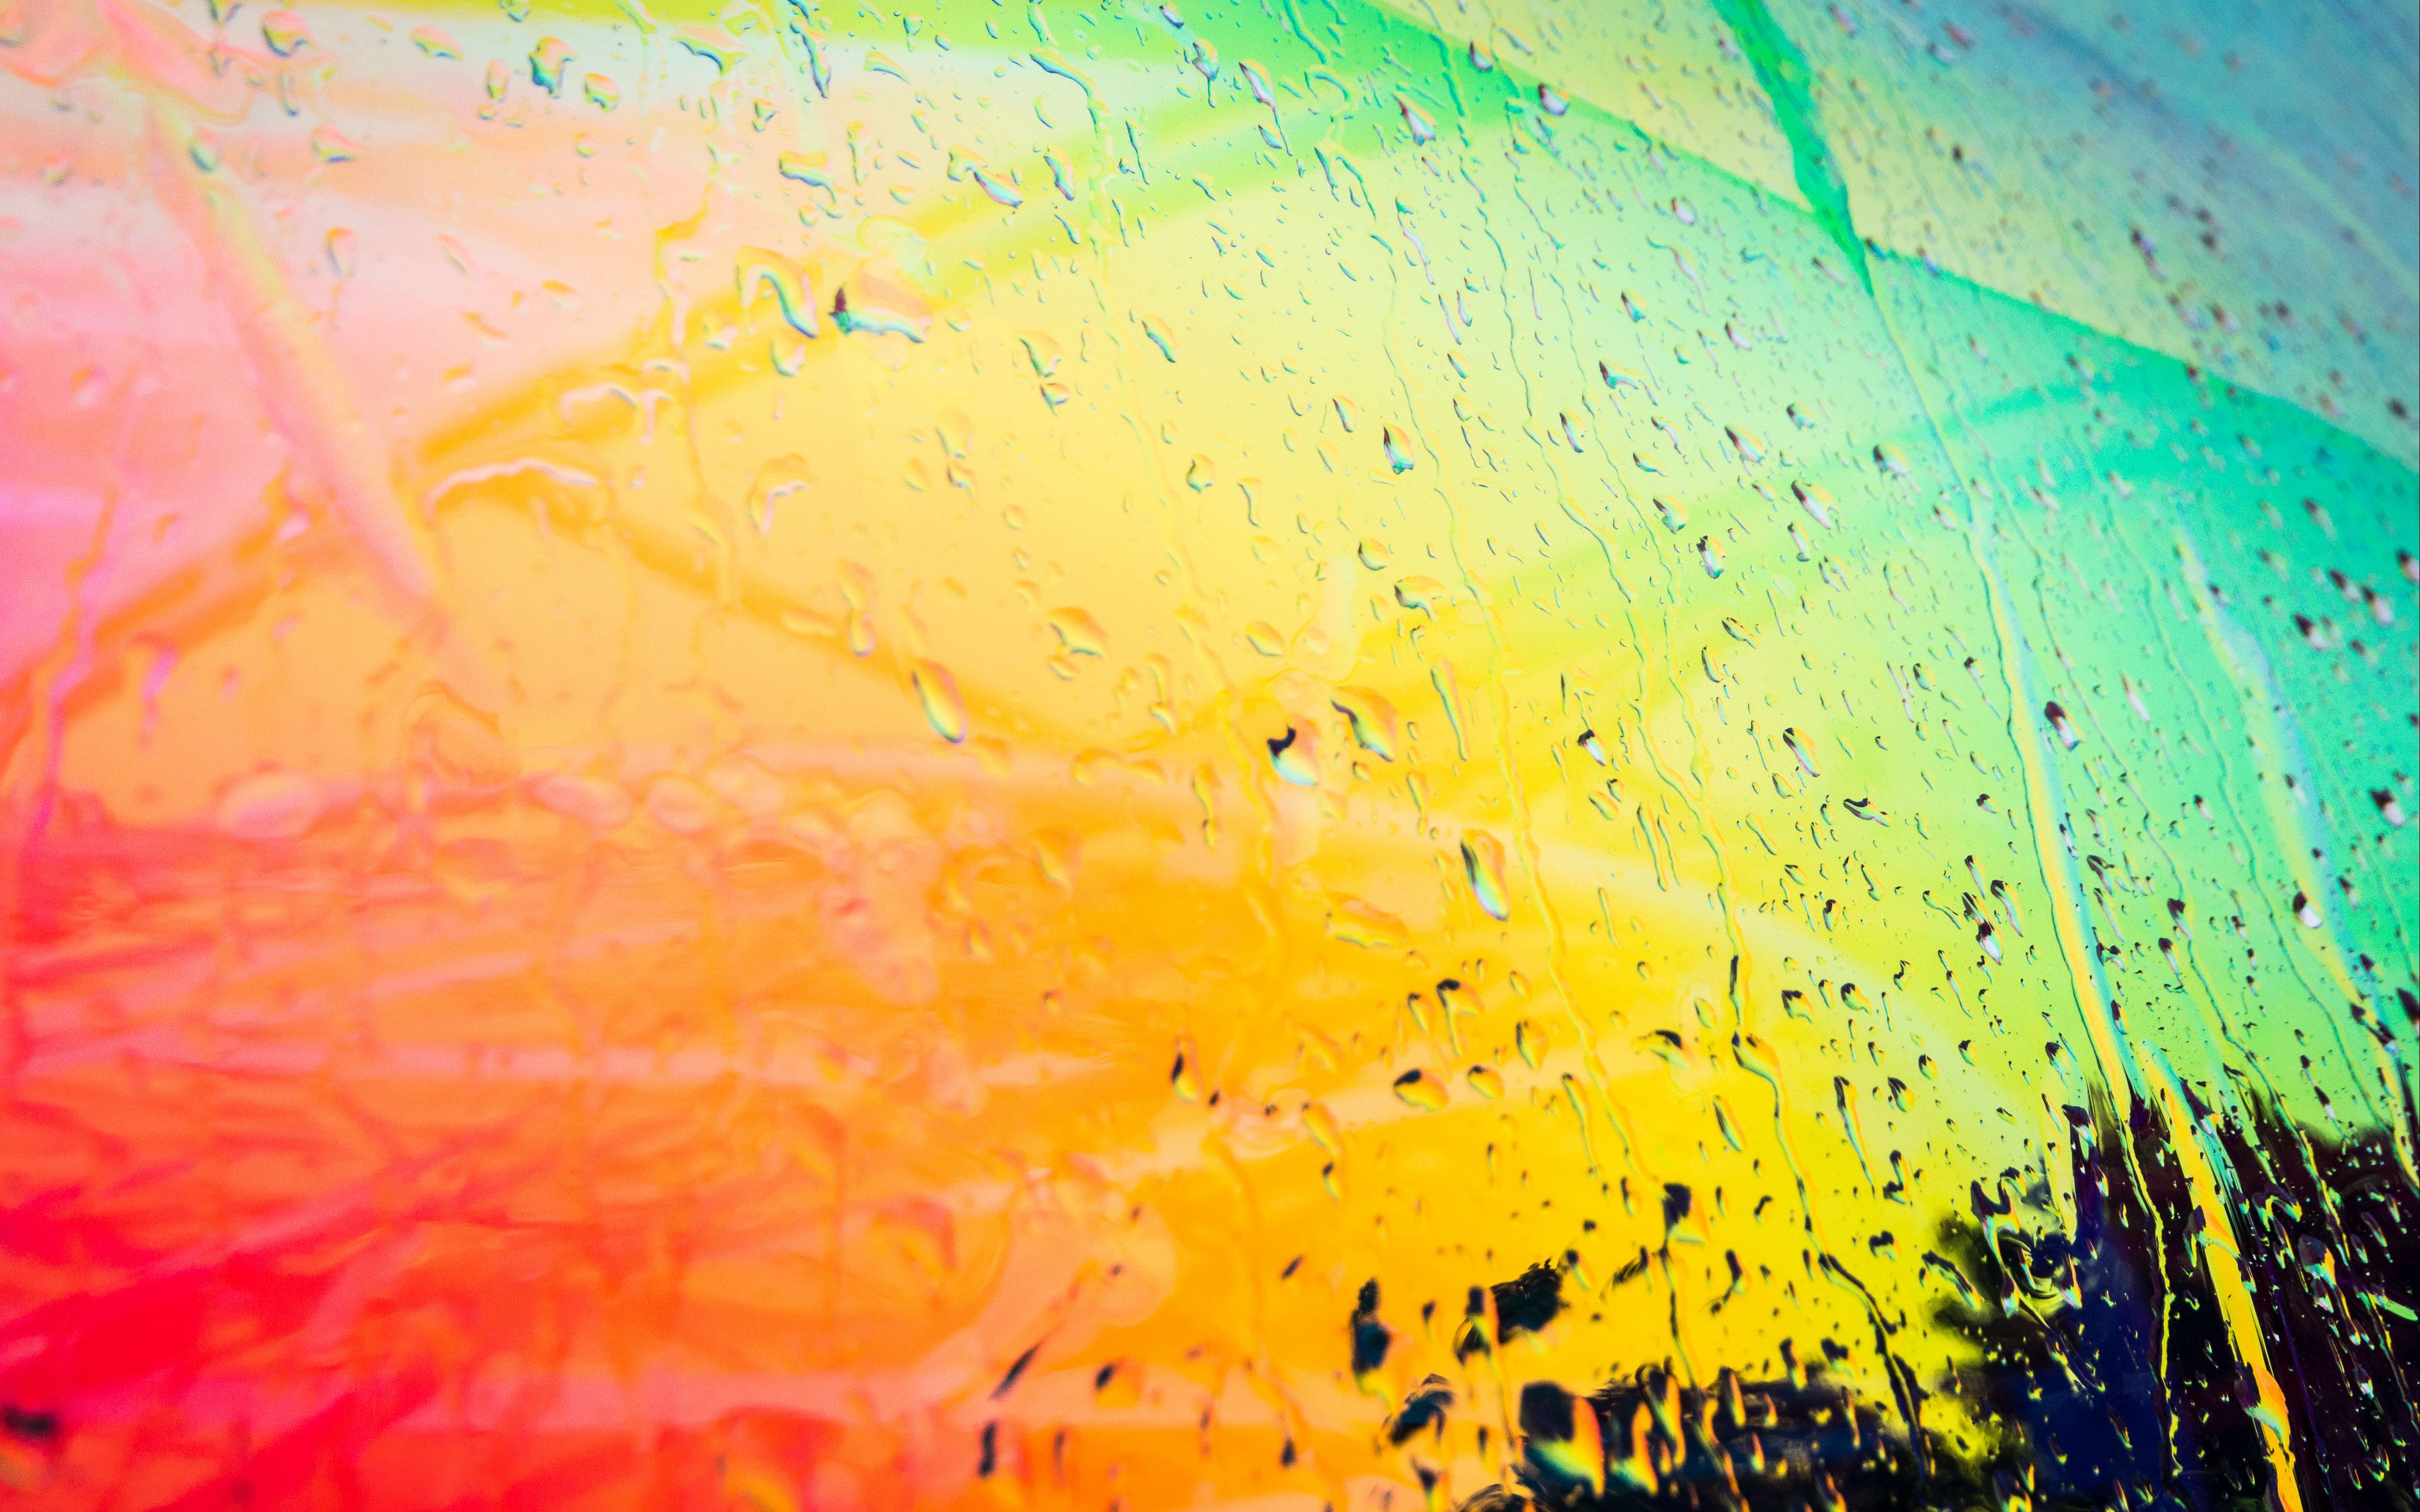 Download wallpaper 3840x2400 drops, abstraction, colorful 4k ultra hd